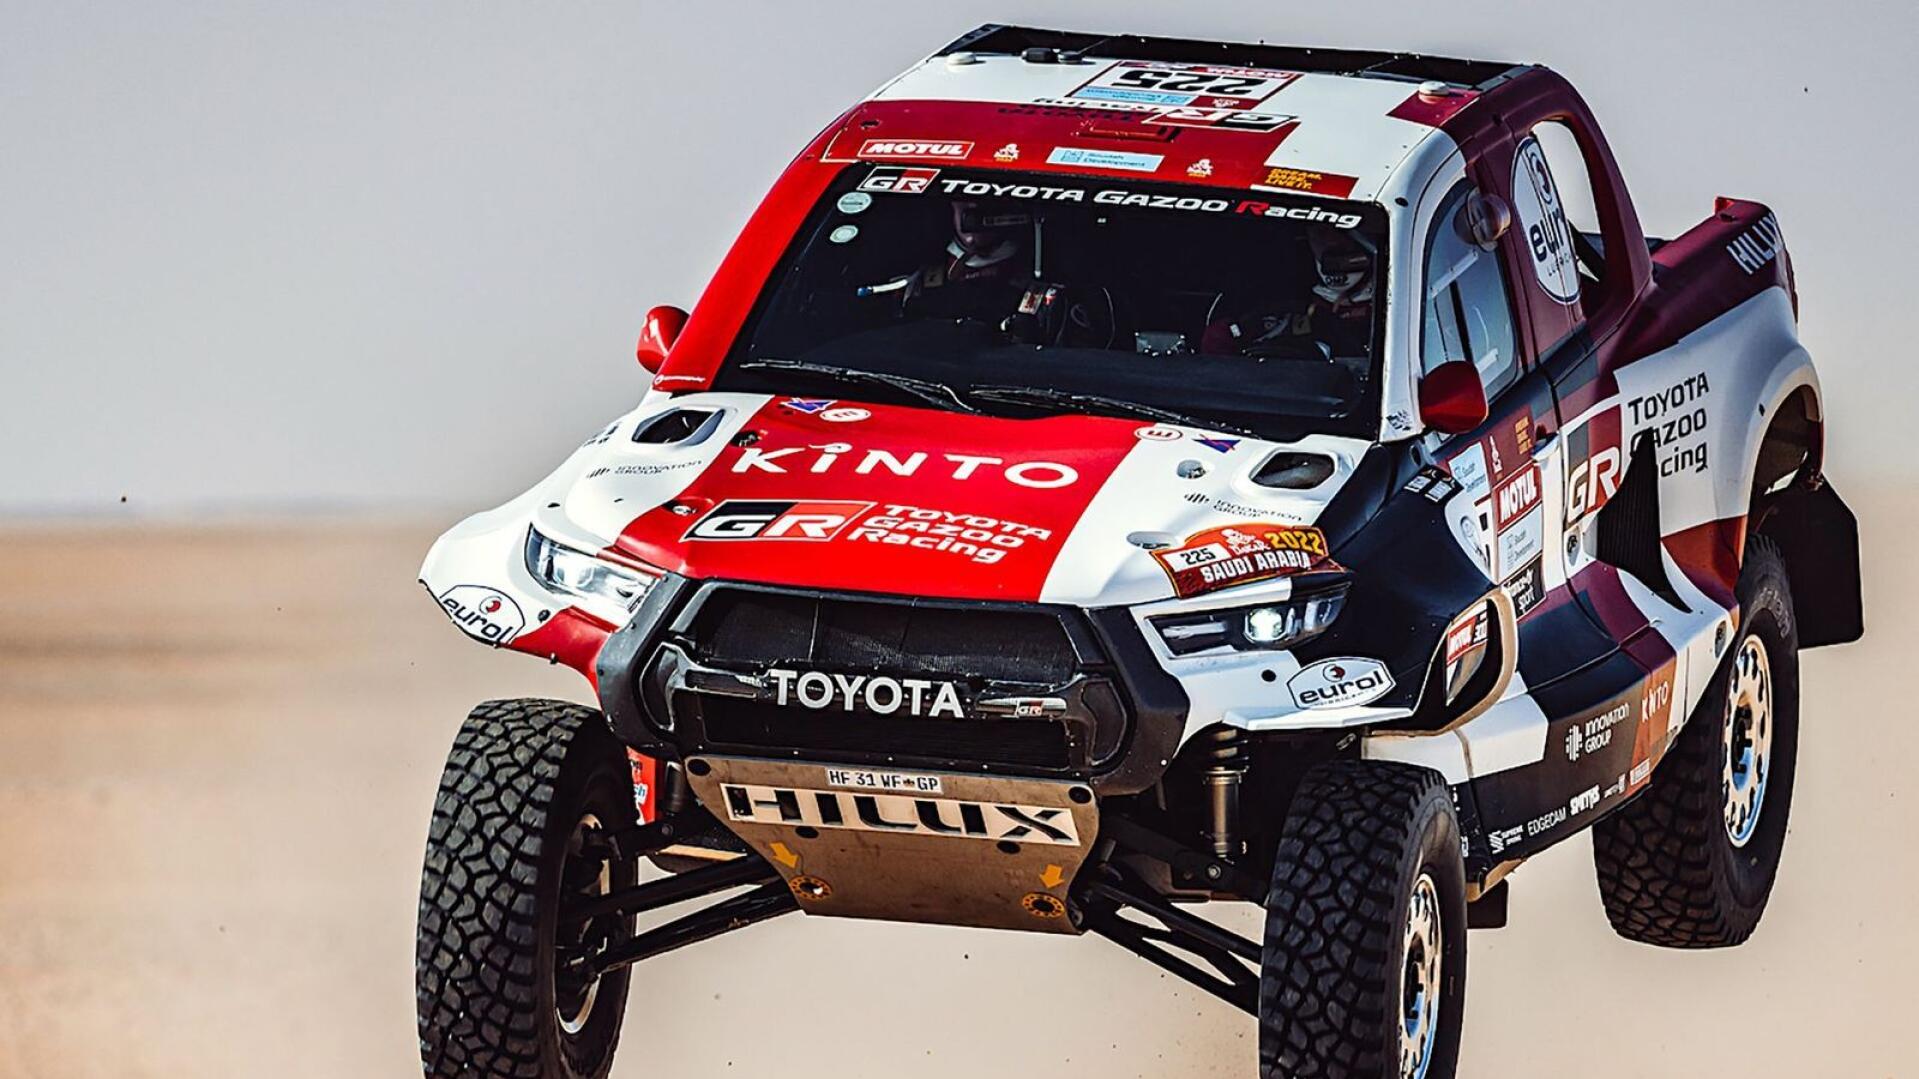 South African driver Henk Lategan won the fifth stage of the Dakar Rally on Thursday as three-time champion Nasser al-Attiyah retained his overall lead